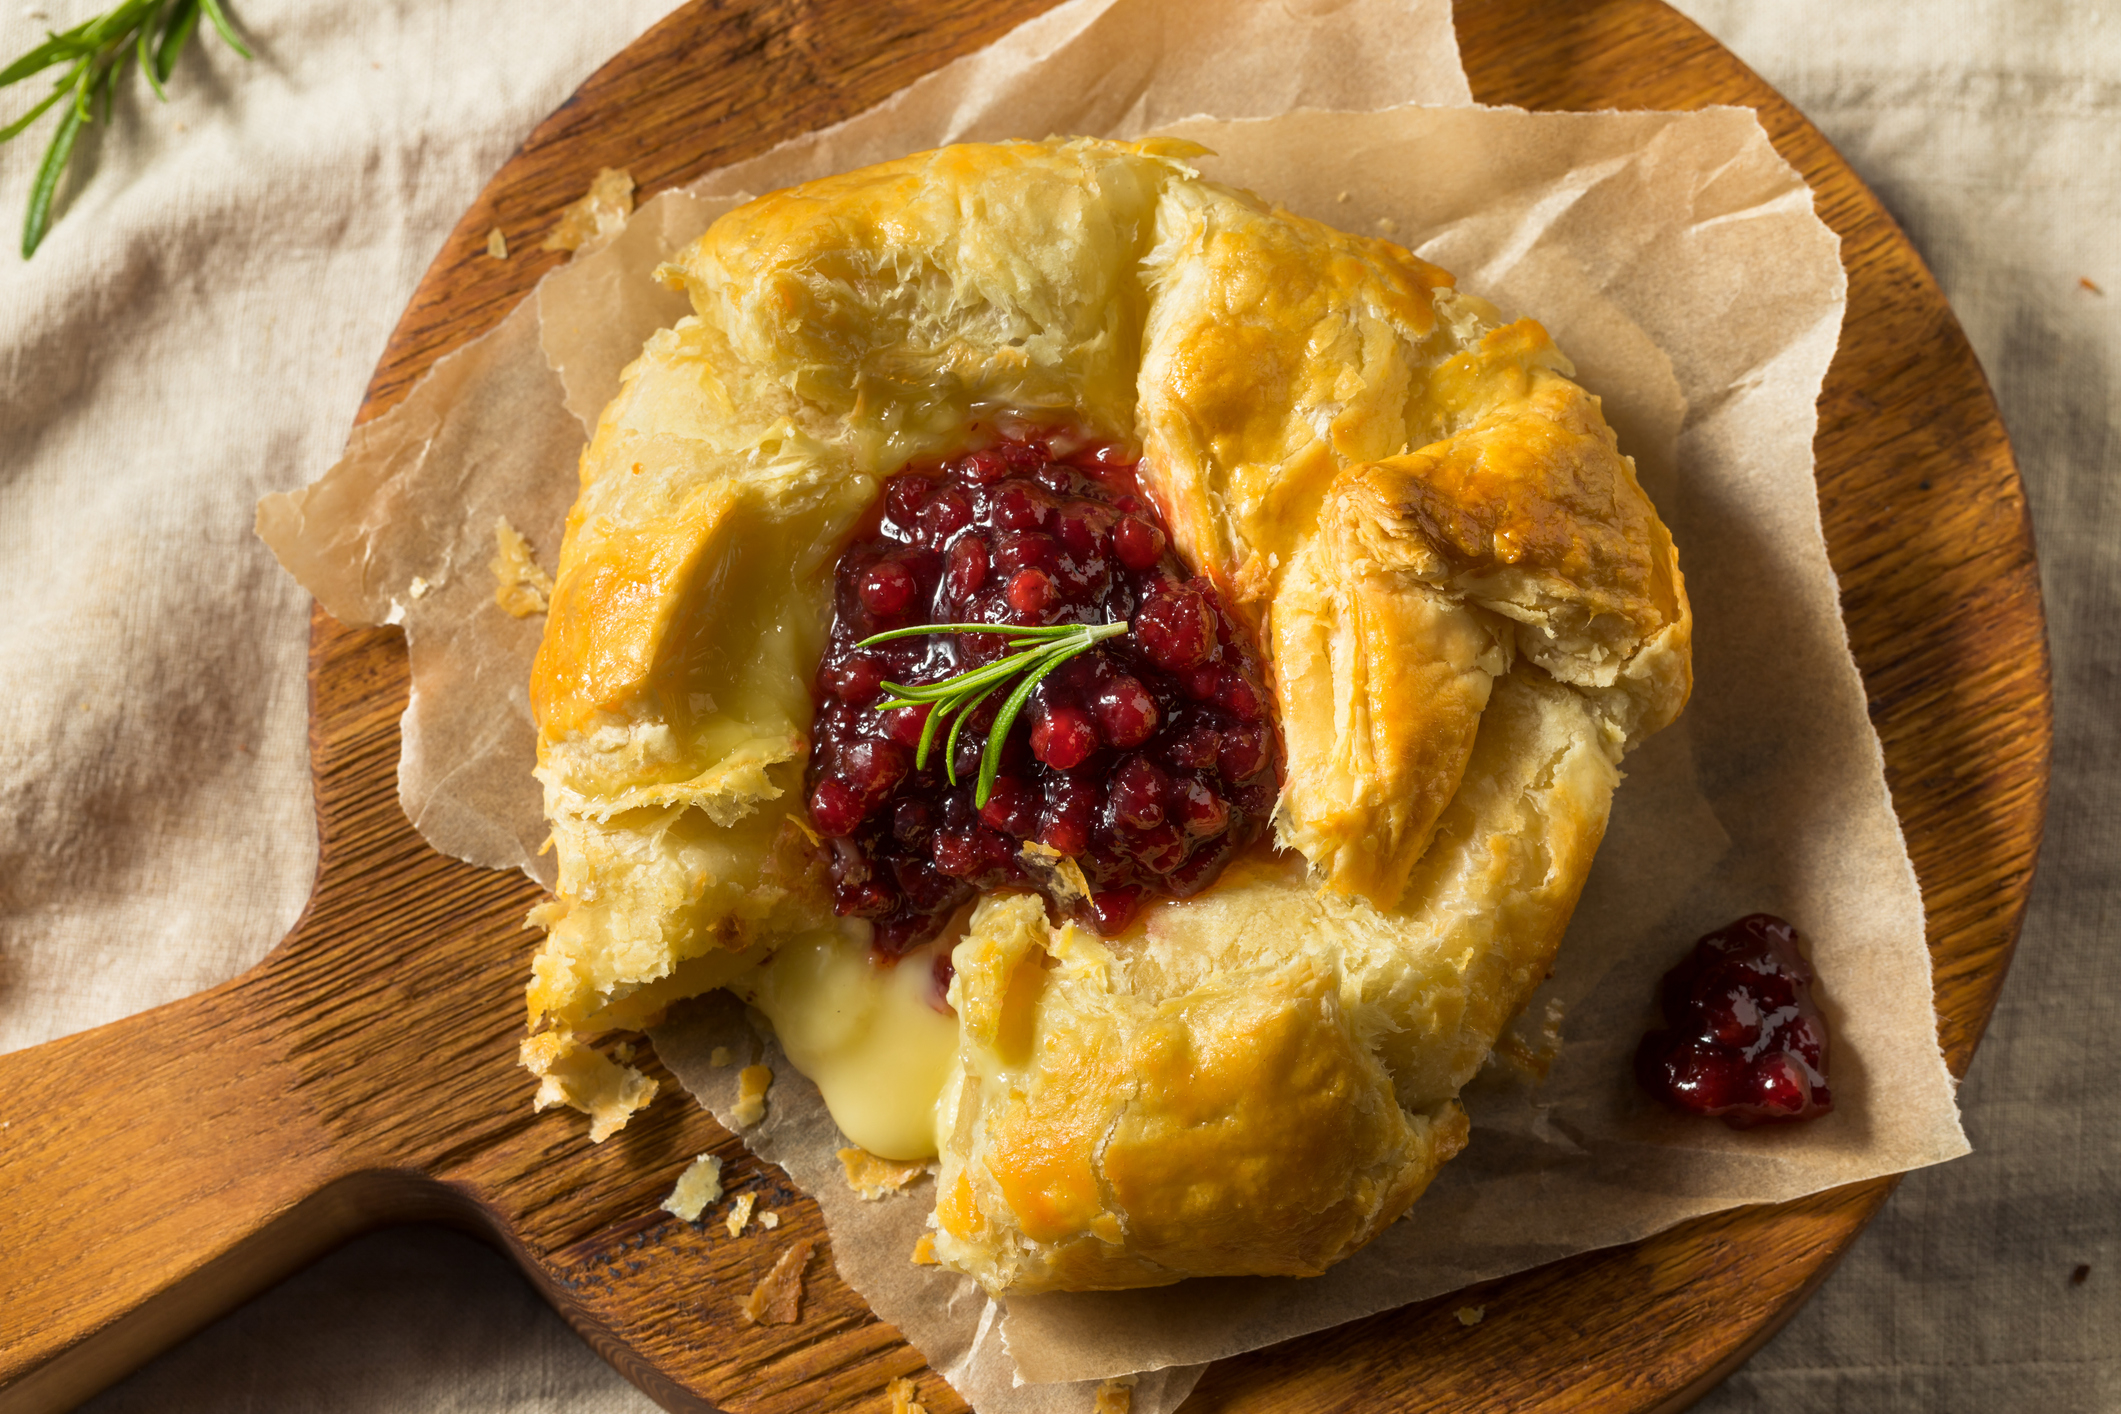 Homemade baked brie with raspberry jam on a wooden serving board